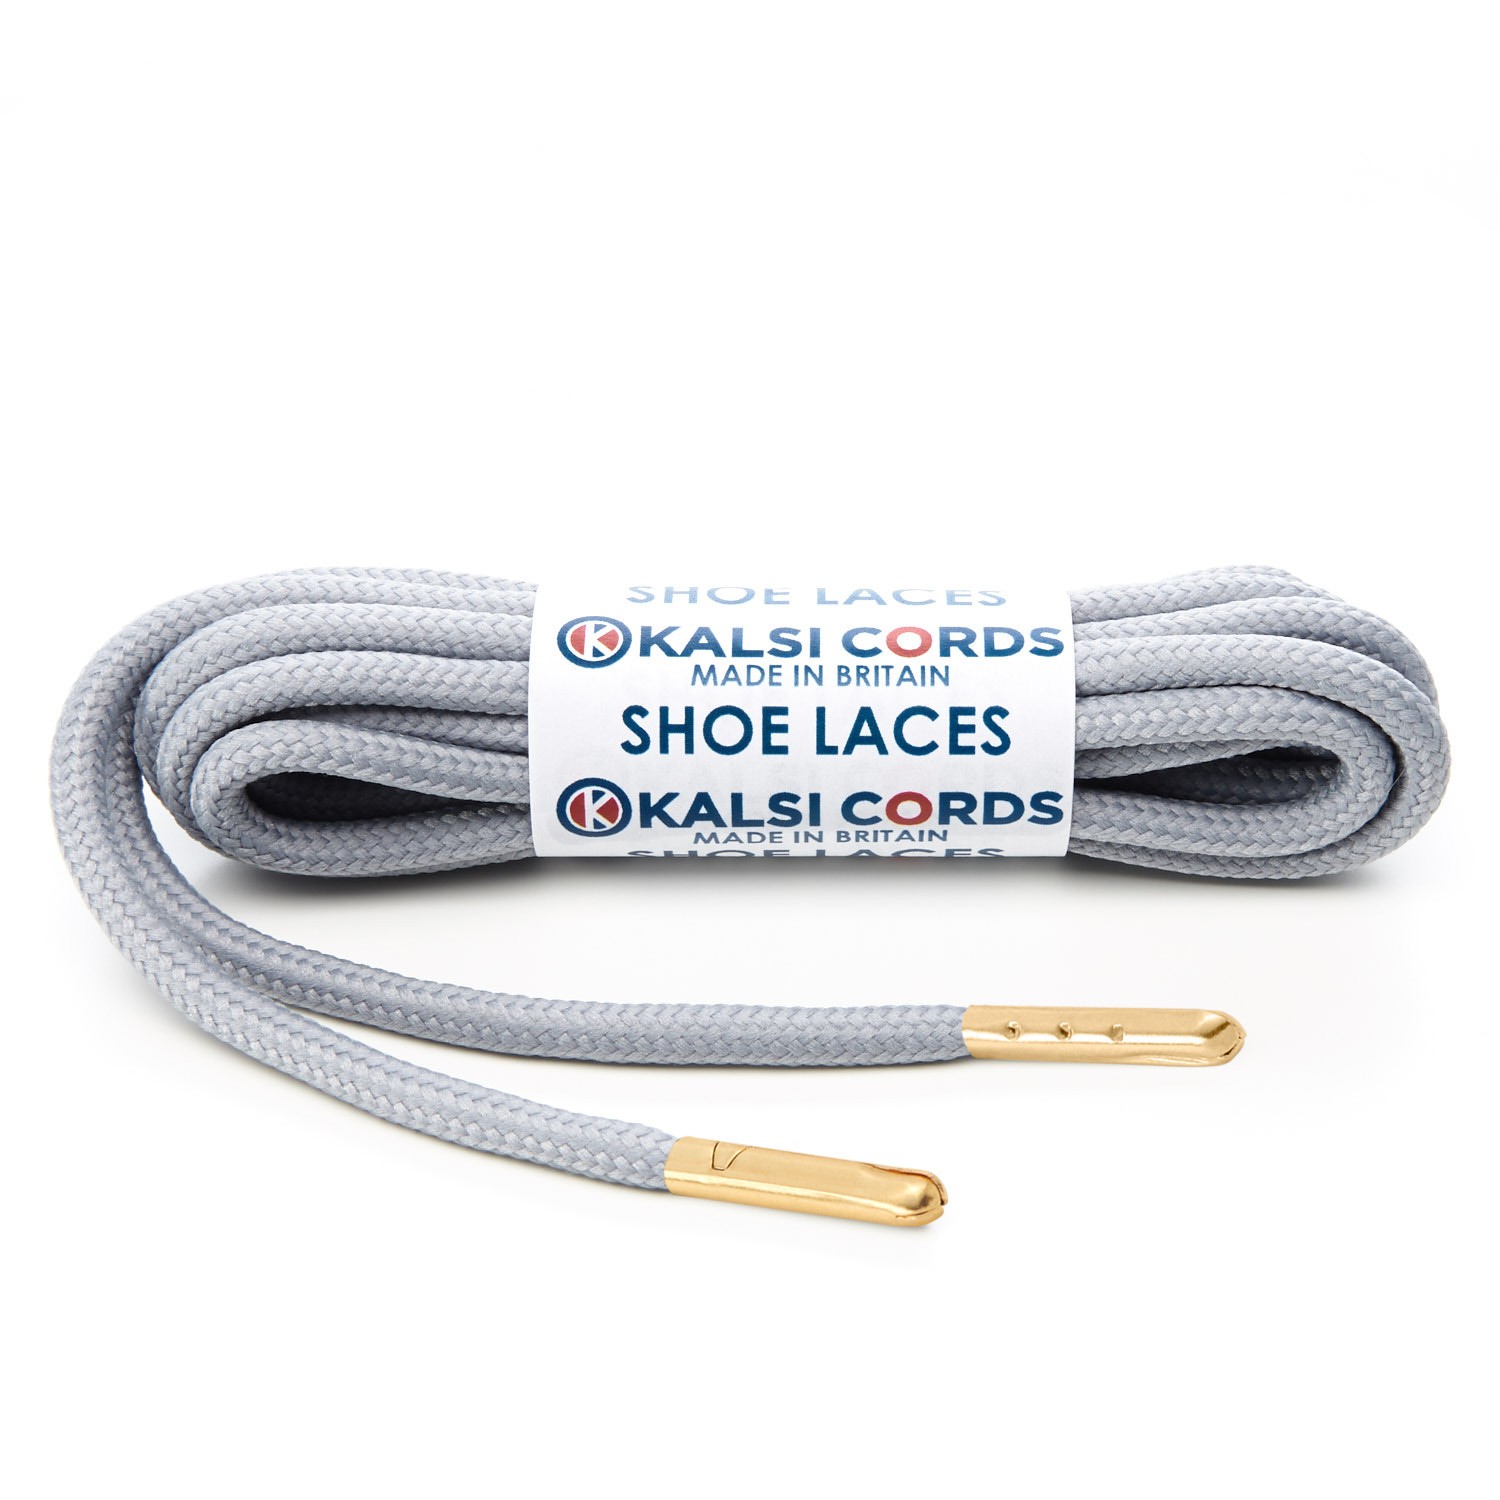 T621 5mm Round Polyester Shoe Laces Frosted Silver 1 Gold Metal Tip Kalsi Cords